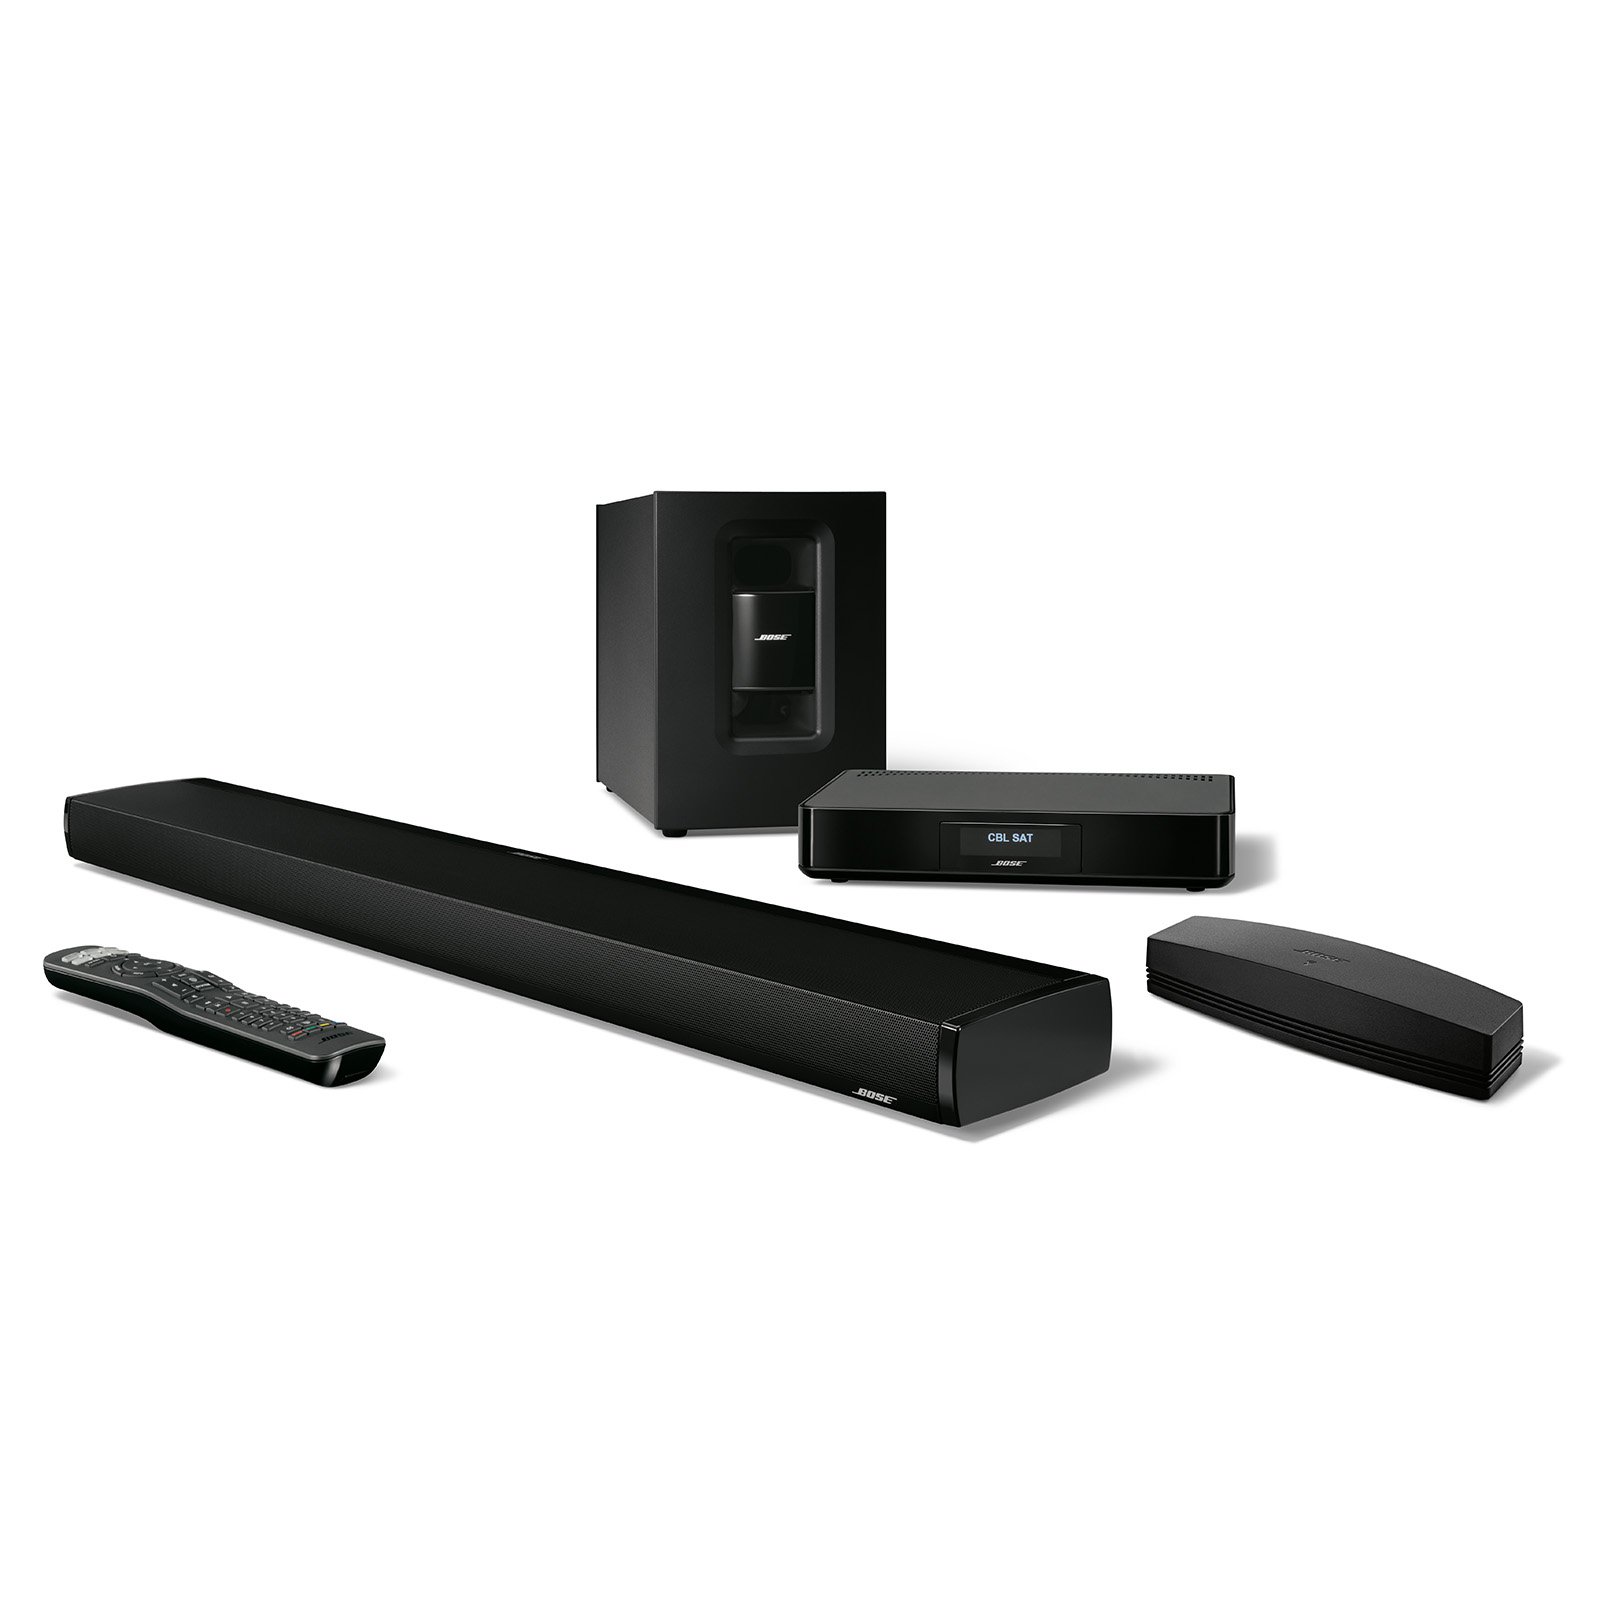 CineMate® 130 home theater system